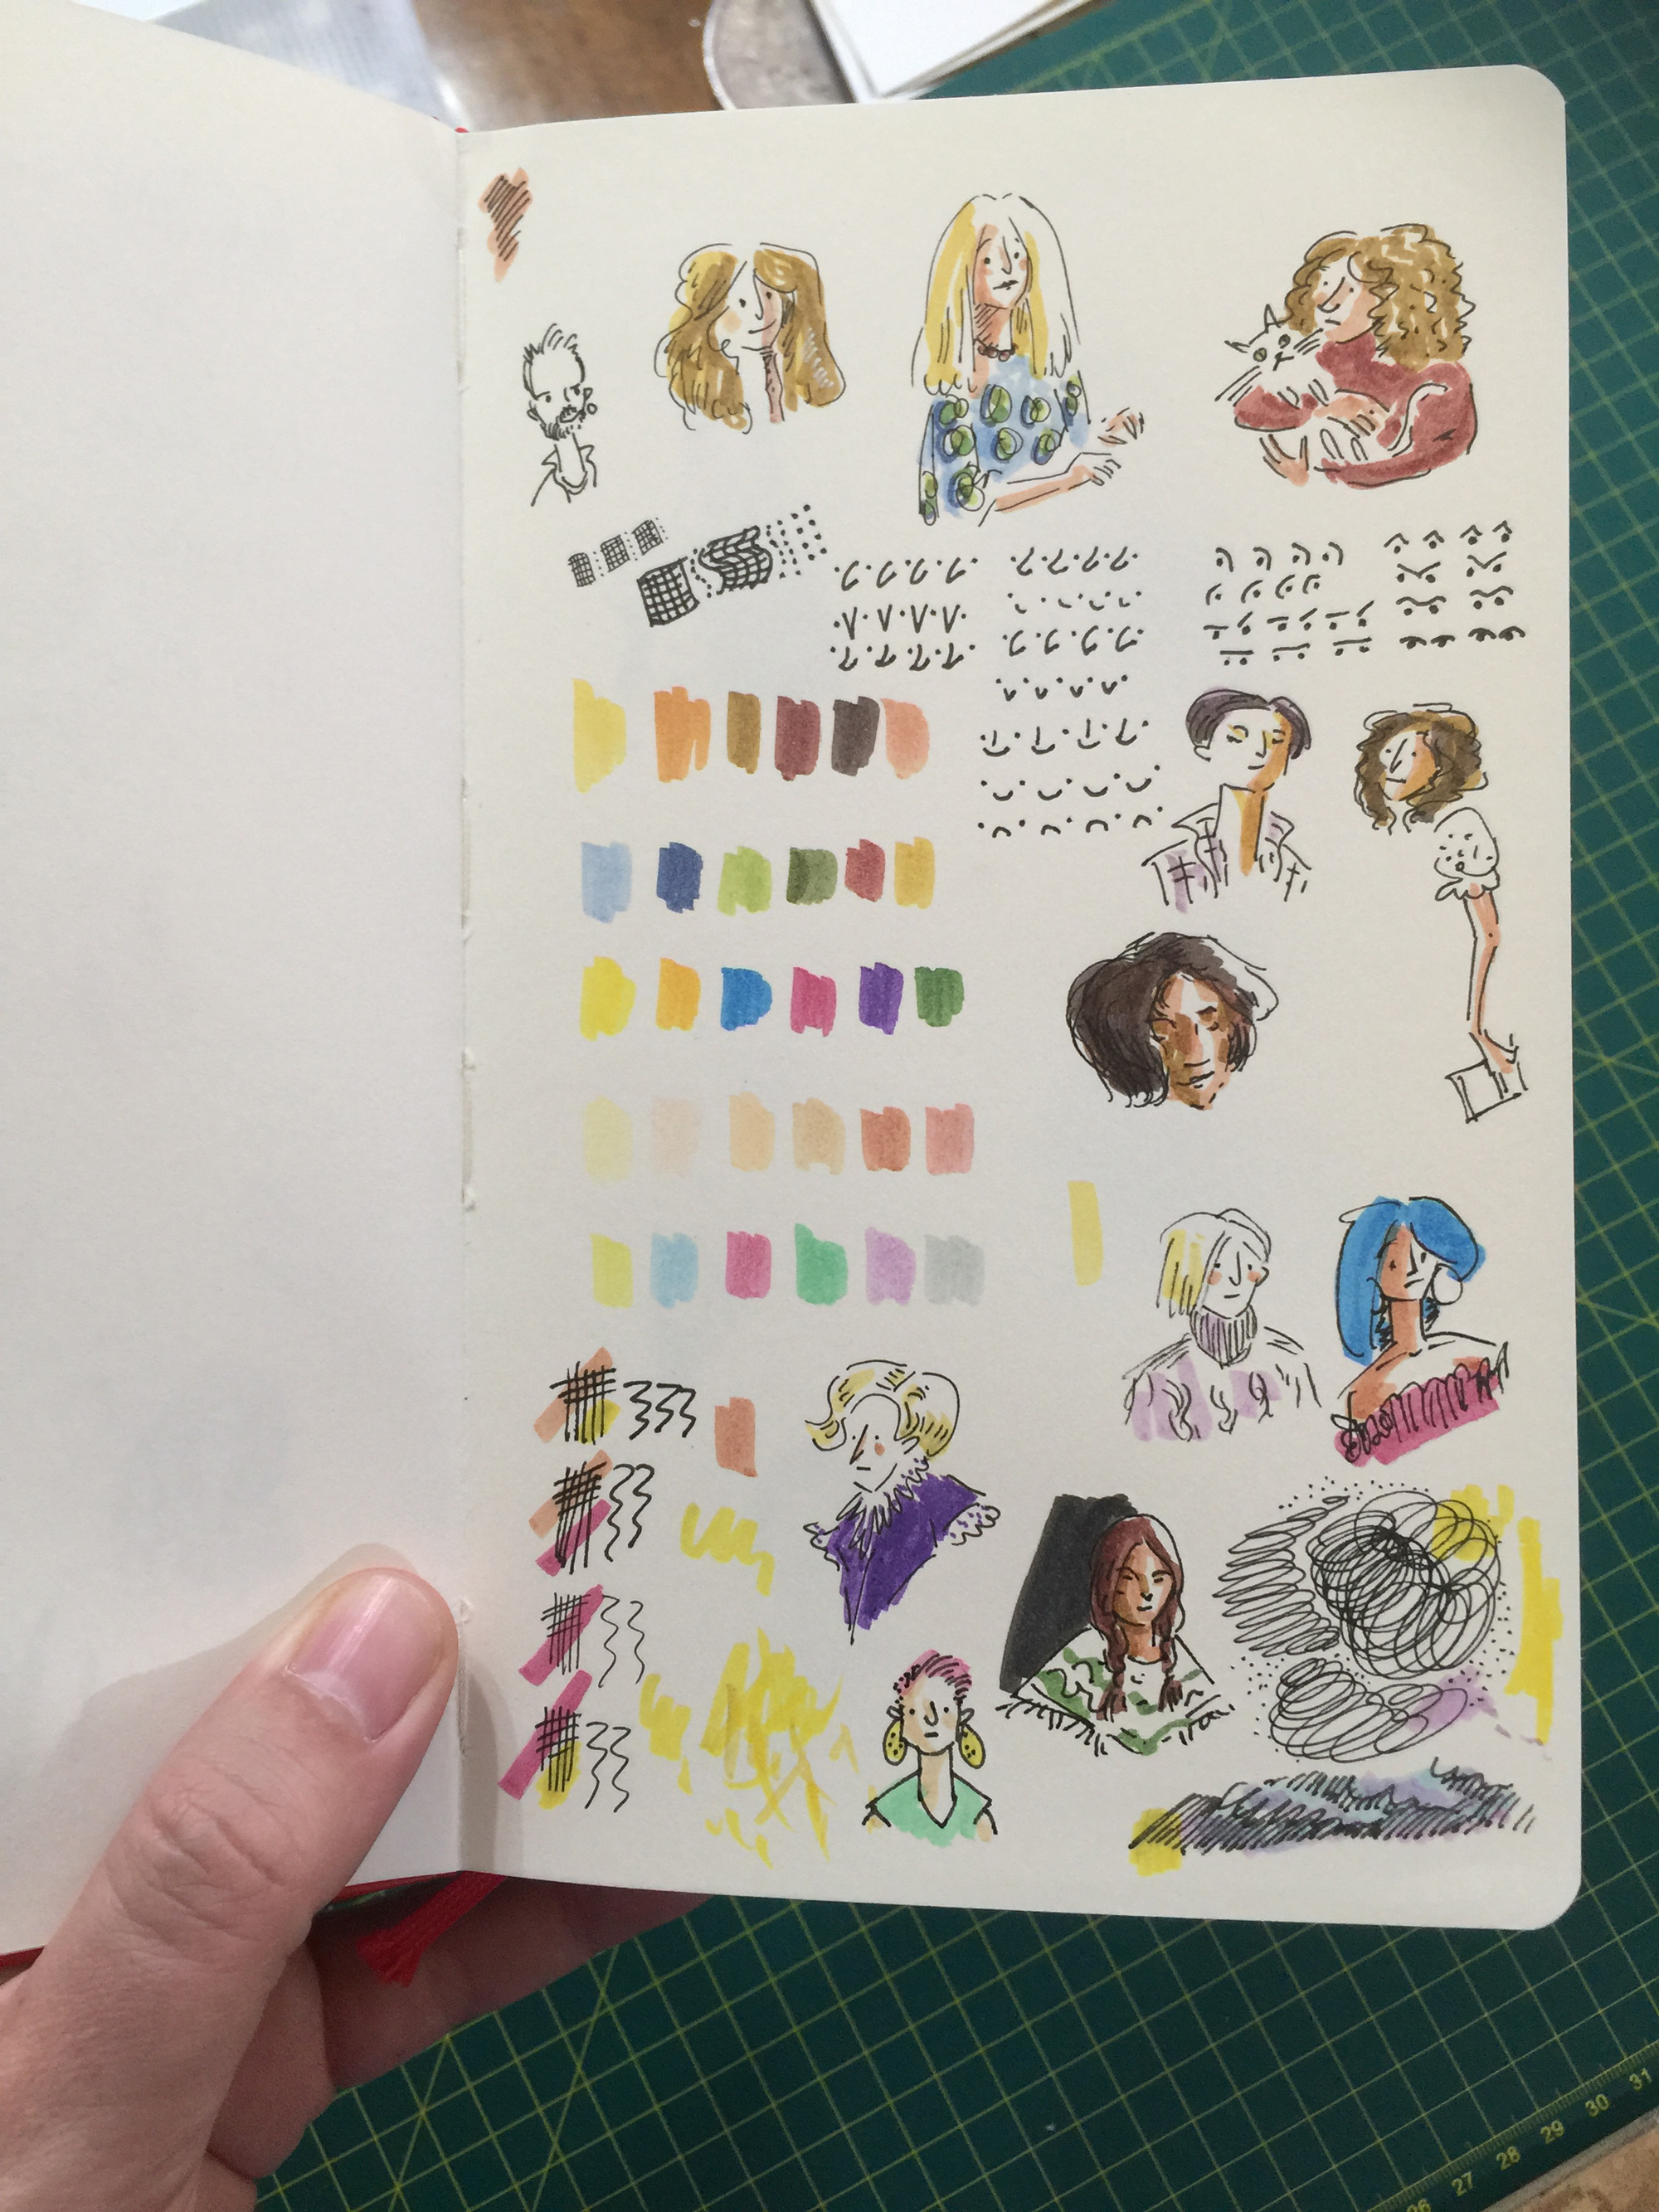 An open sketchbook filled with colour swatches and sketchy portraits